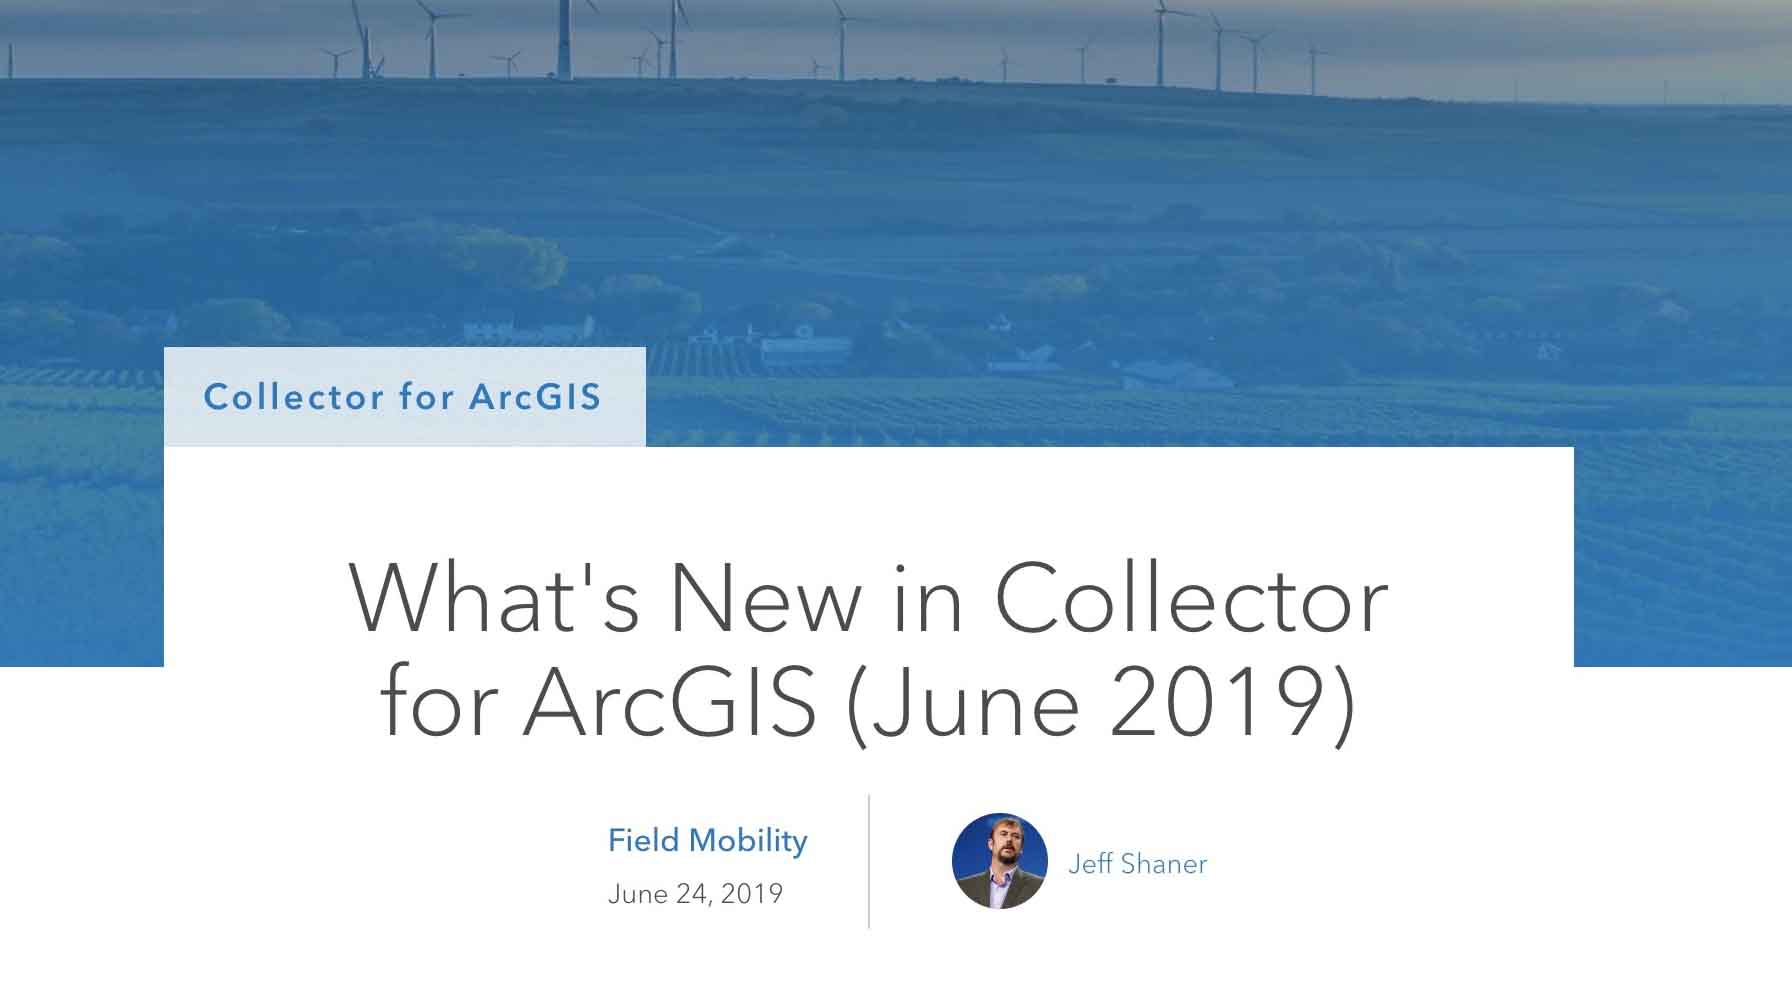 NEWSLETTER - NEWS - WHATS NEW IN COLLECTOR